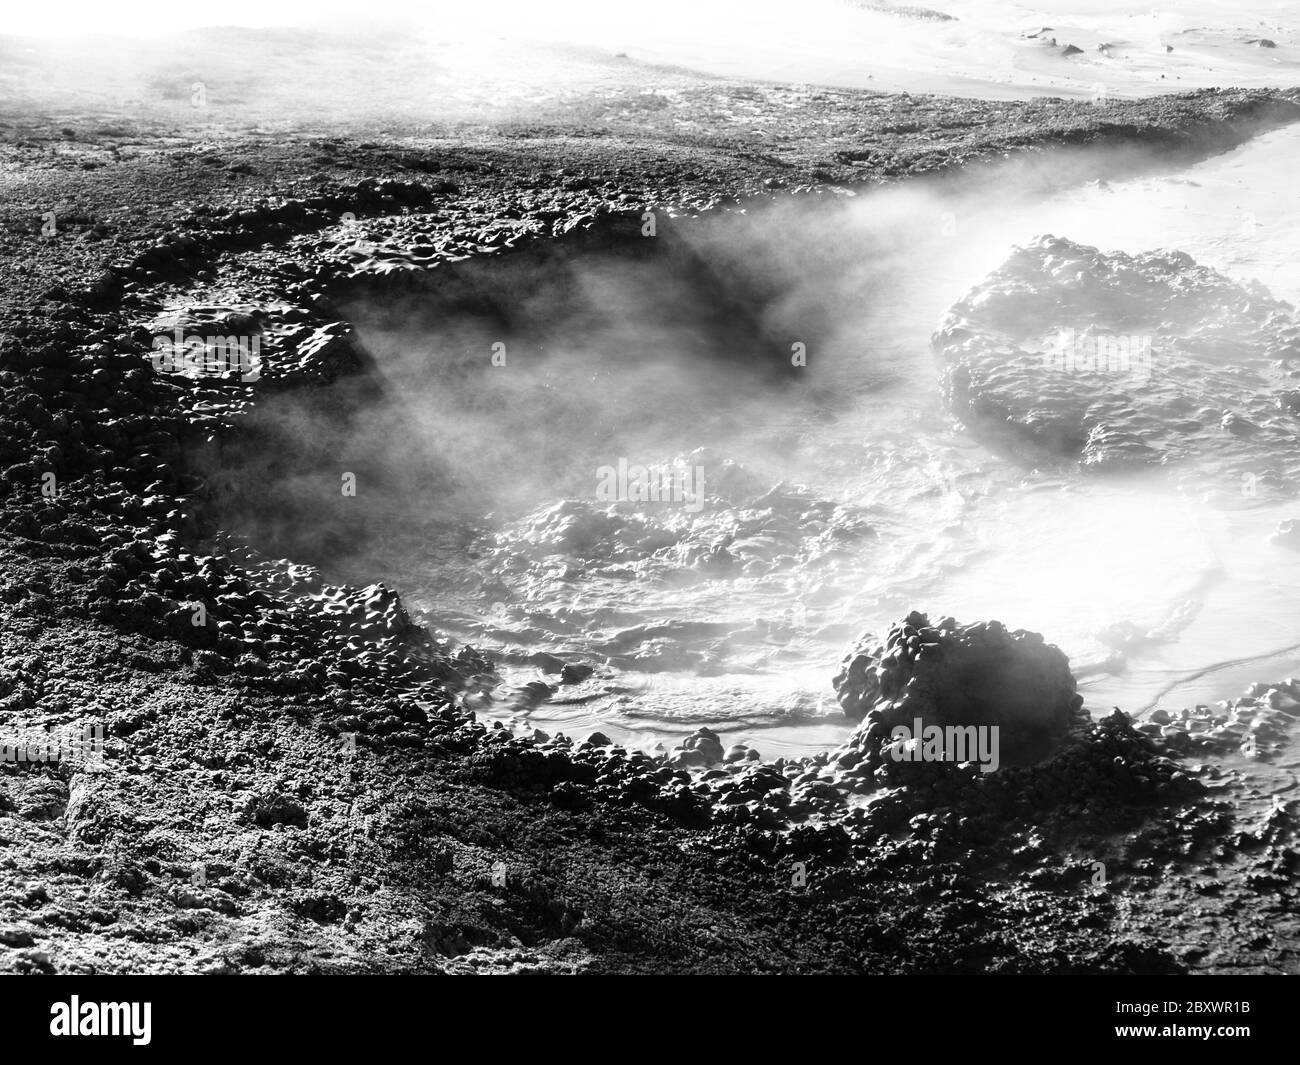 Steam escaping from mudpot and illuminated by sun rays, Sol de Manana, Altiplano, Bolivia, black and white image Stock Photo